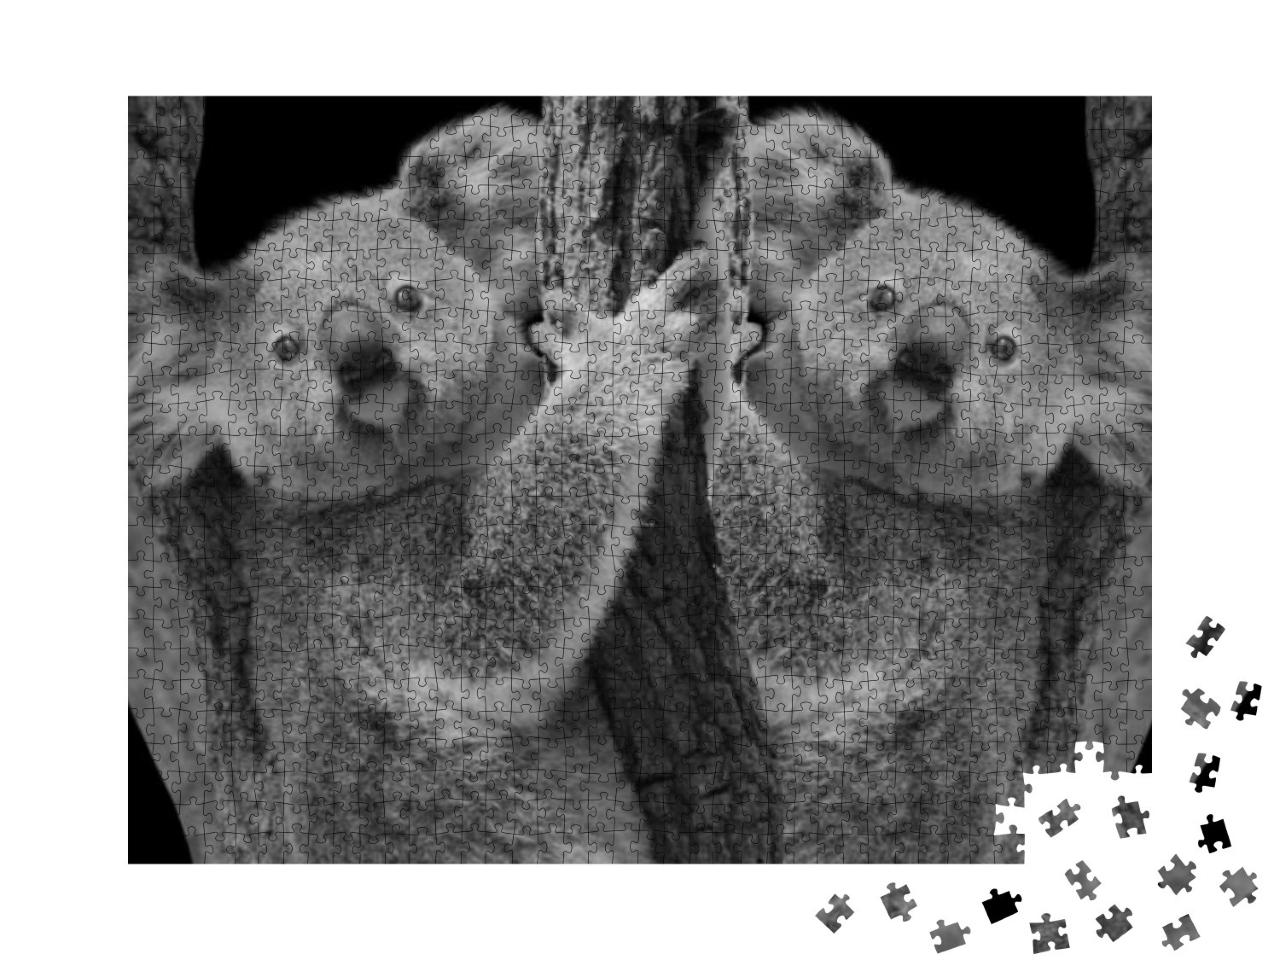 Two Cute Koala Bear Sitting on the Tree... Jigsaw Puzzle with 1000 pieces